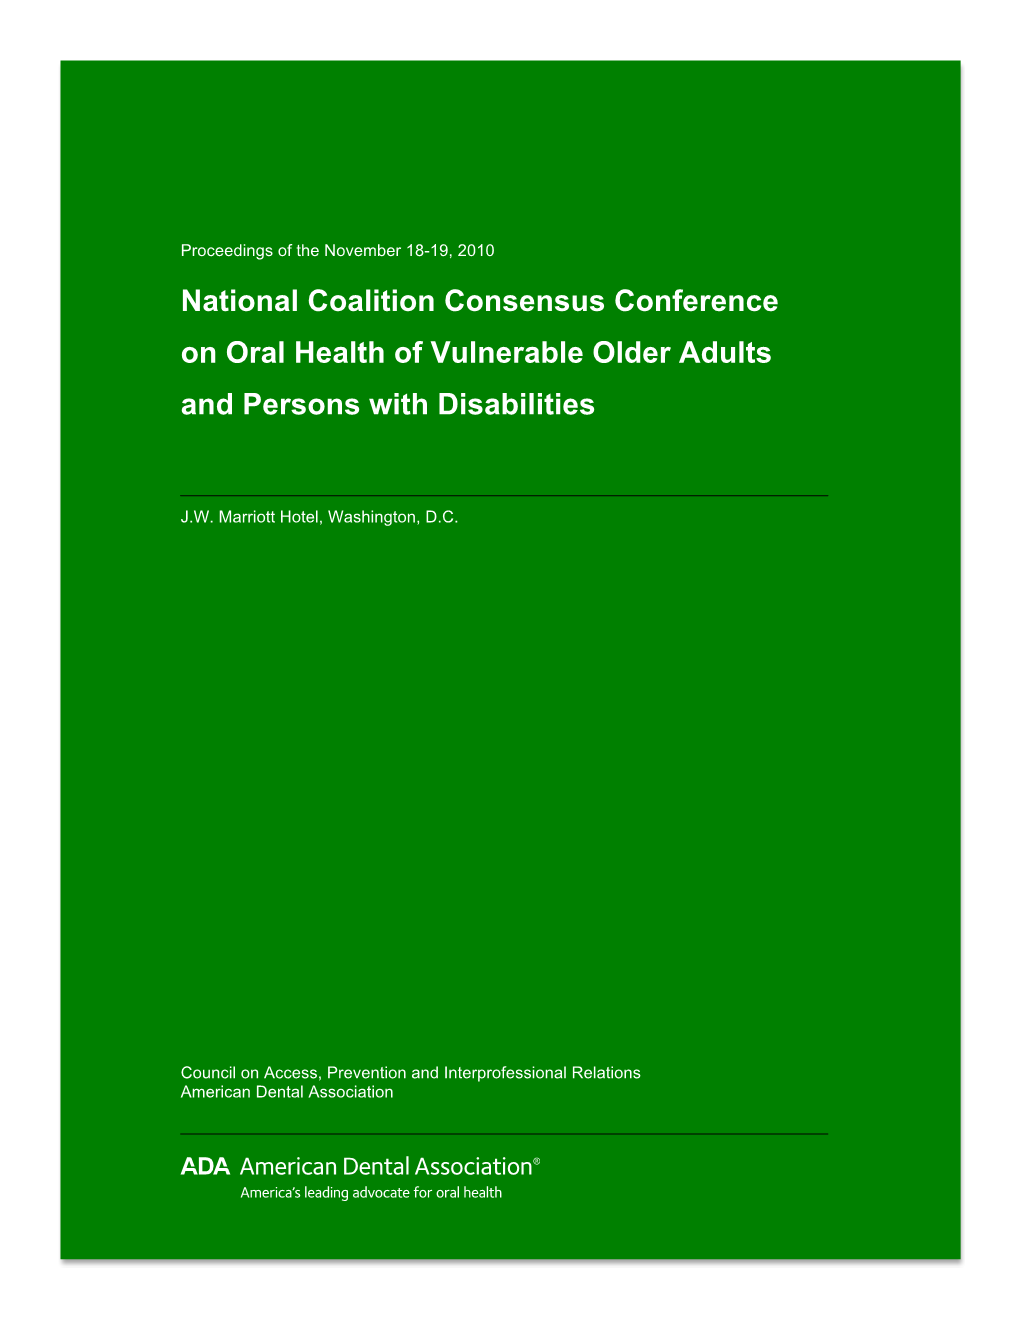 National Coalition Consensus Conference on Oral Health of Vulnerable Older Adults and Persons with Disabilities